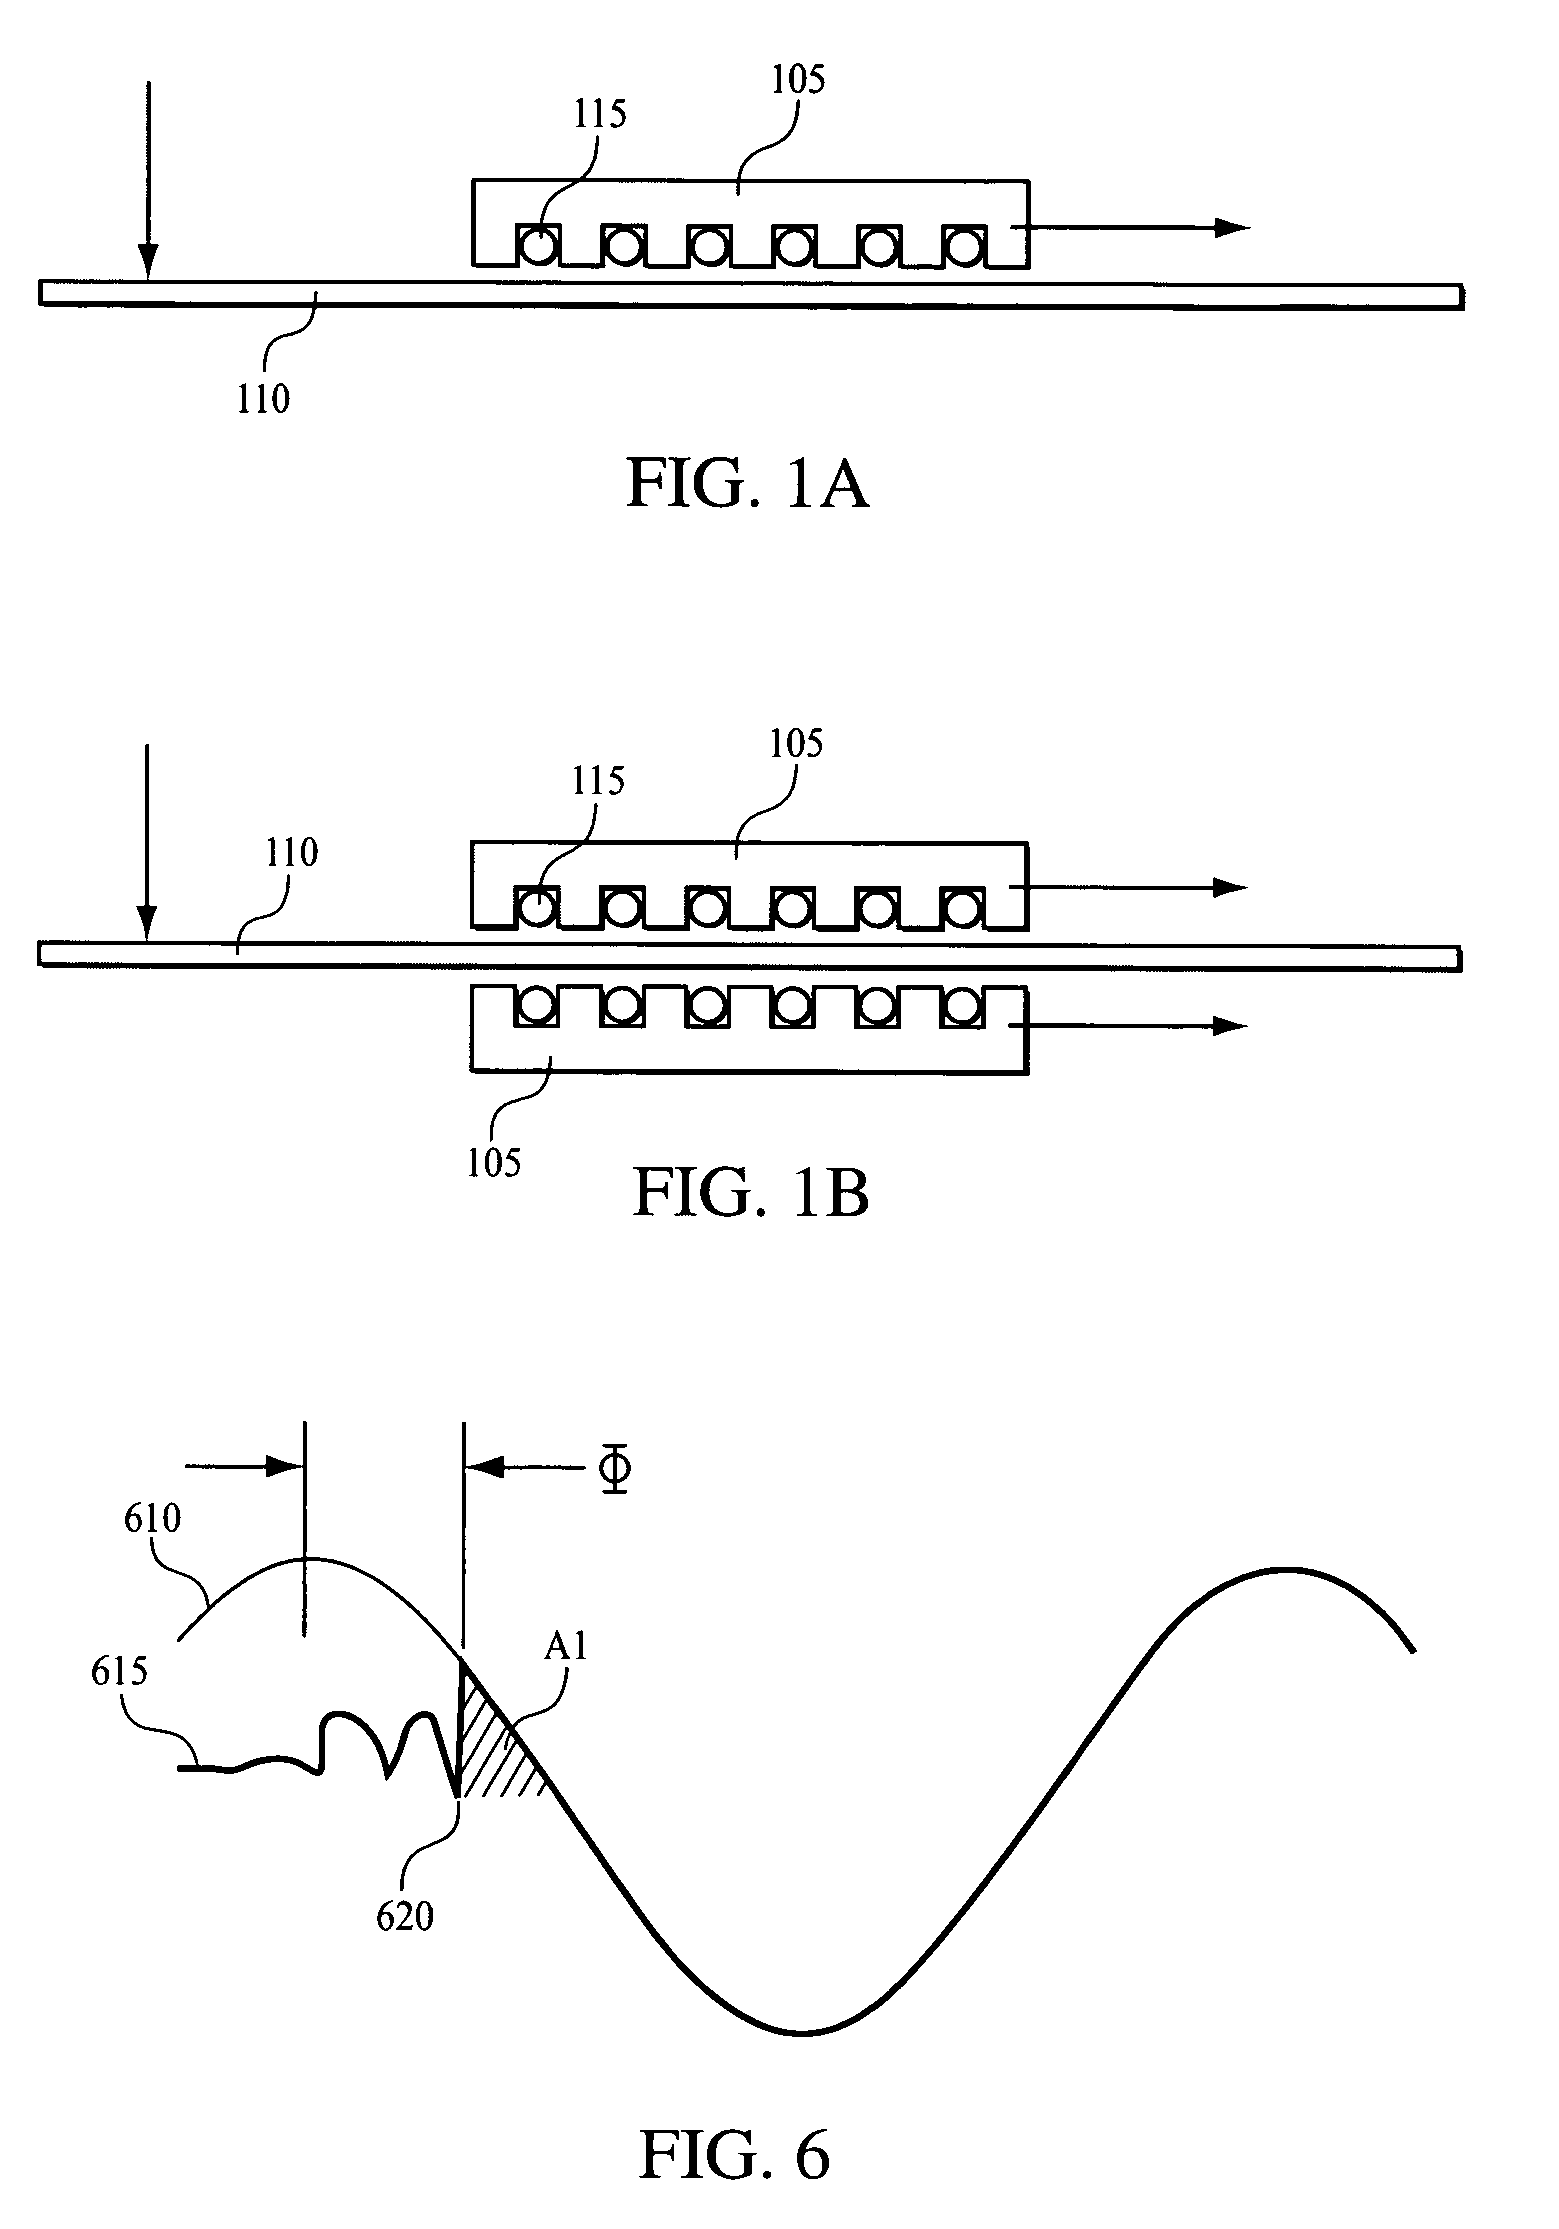 Linear position sensing system and coil switching methods for closed-loop control of large linear induction motor systems